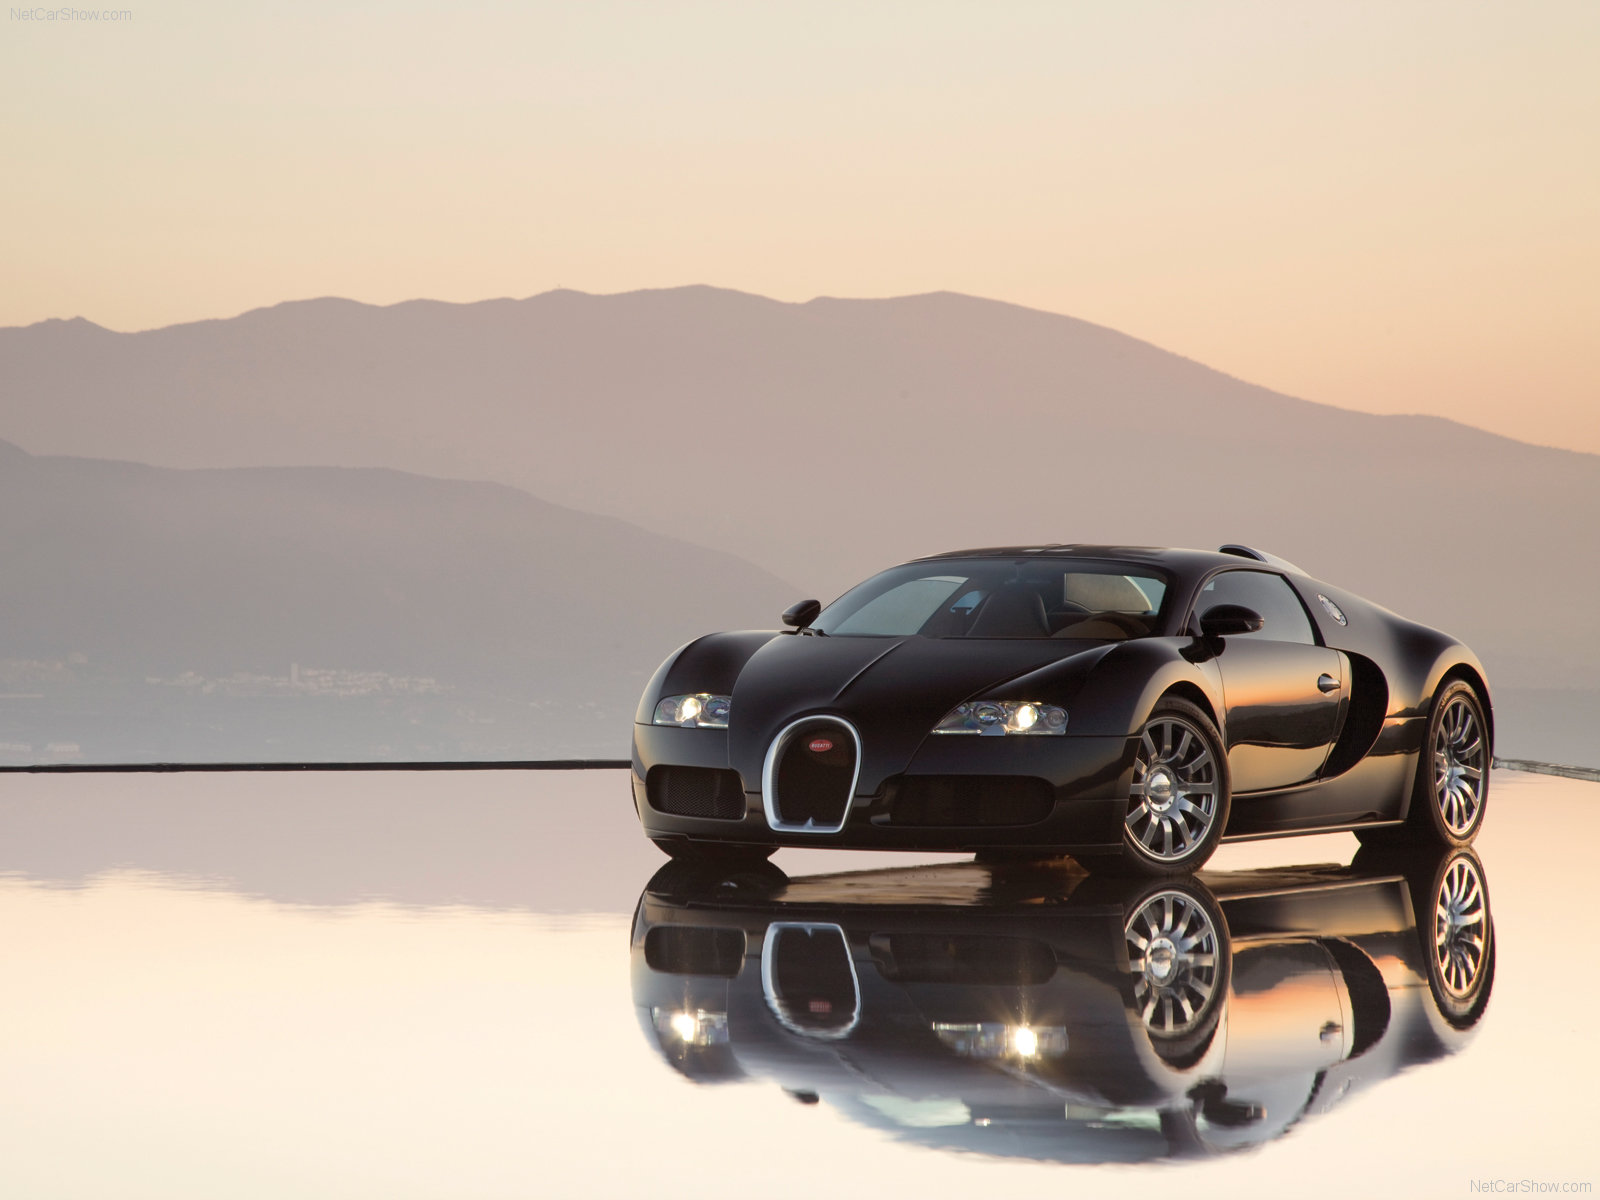 49 Bugatti Wallpapers High Resolution Pictures On Wallpapersafari